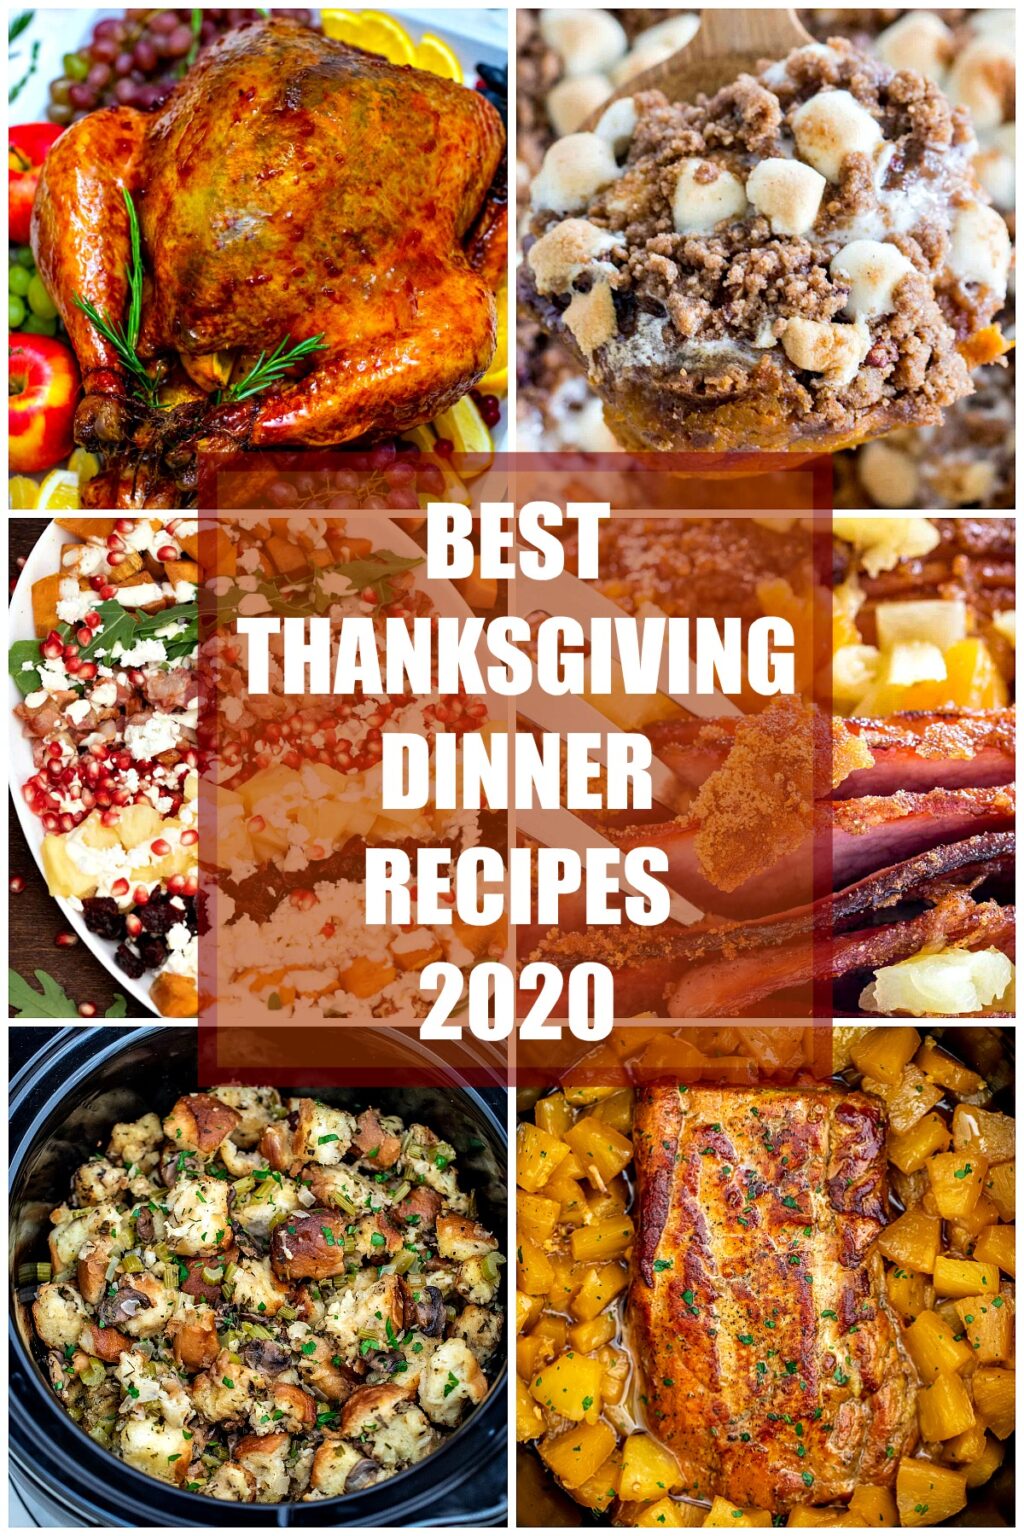 Best Thanksgiving dinner recipes 2020 Sweet and Savory Meals